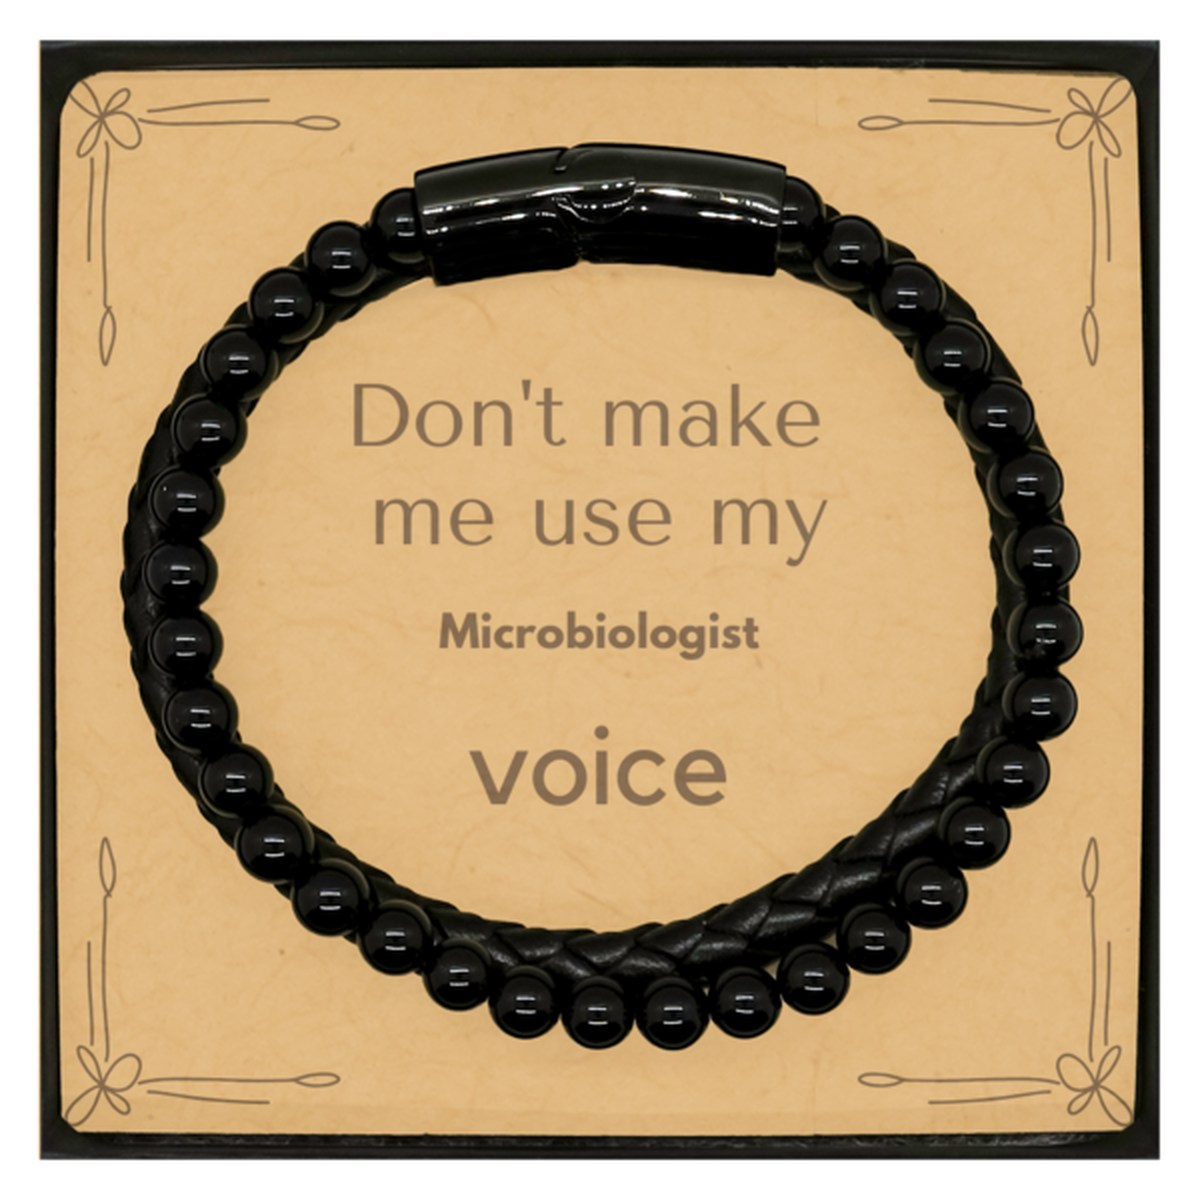 Don't make me use my Microbiologist voice, Sarcasm Microbiologist Card Gifts, Christmas Microbiologist Stone Leather Bracelets Birthday Unique Gifts For Microbiologist Coworkers, Men, Women, Colleague, Friends